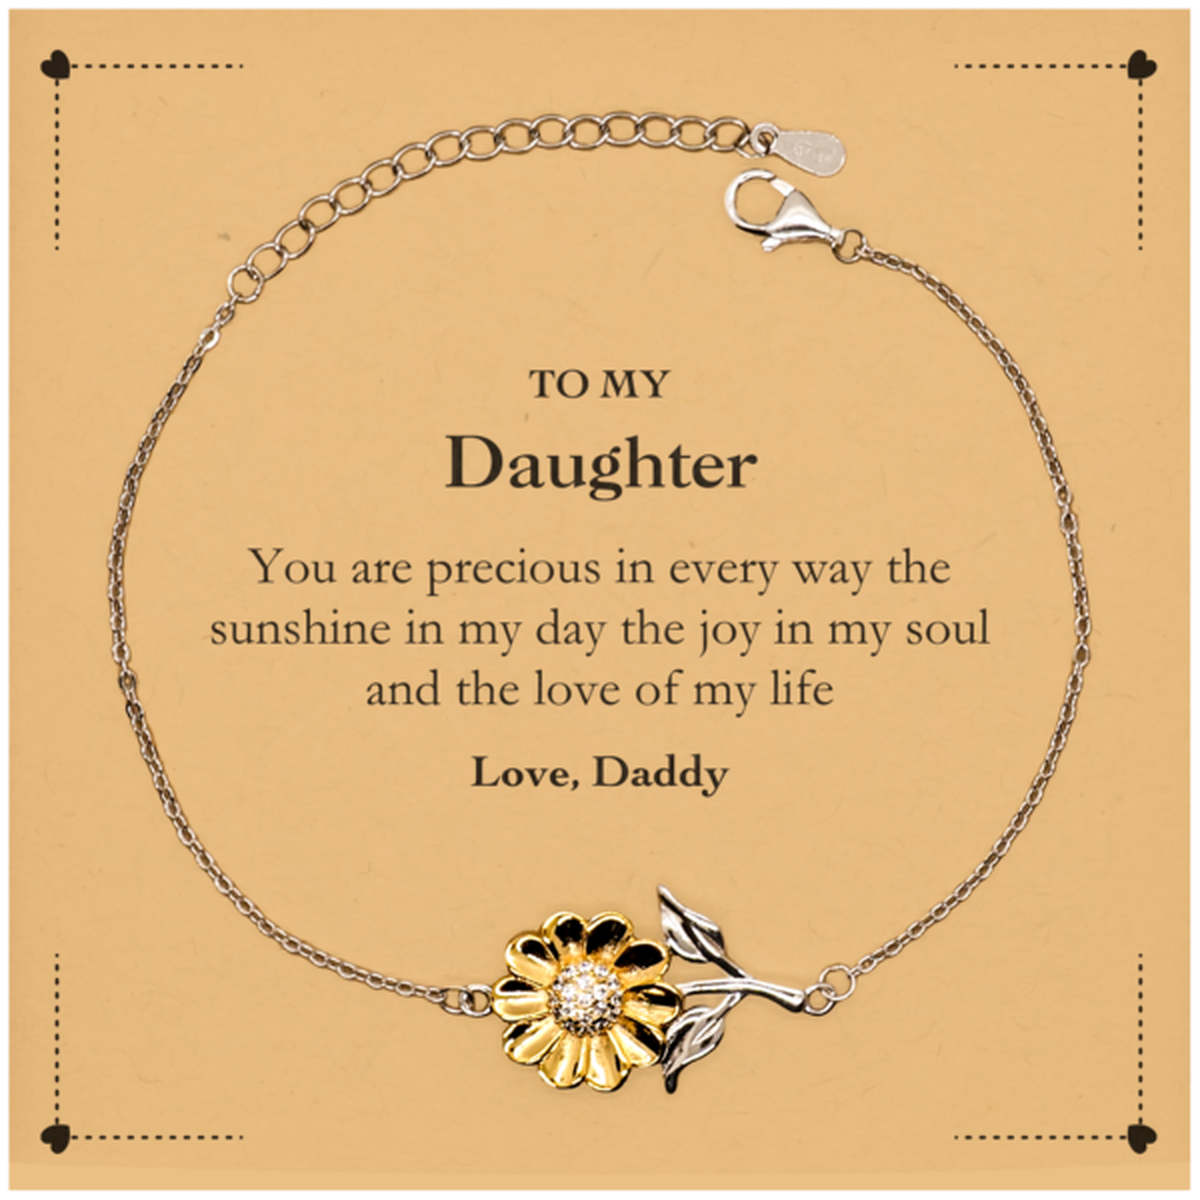 Graduation Gifts for Daughter Sunflower Bracelet Present from Daddy, Christmas Daughter Birthday Gifts Daughter You are precious in every way the sunshine in my day. Love, Daddy